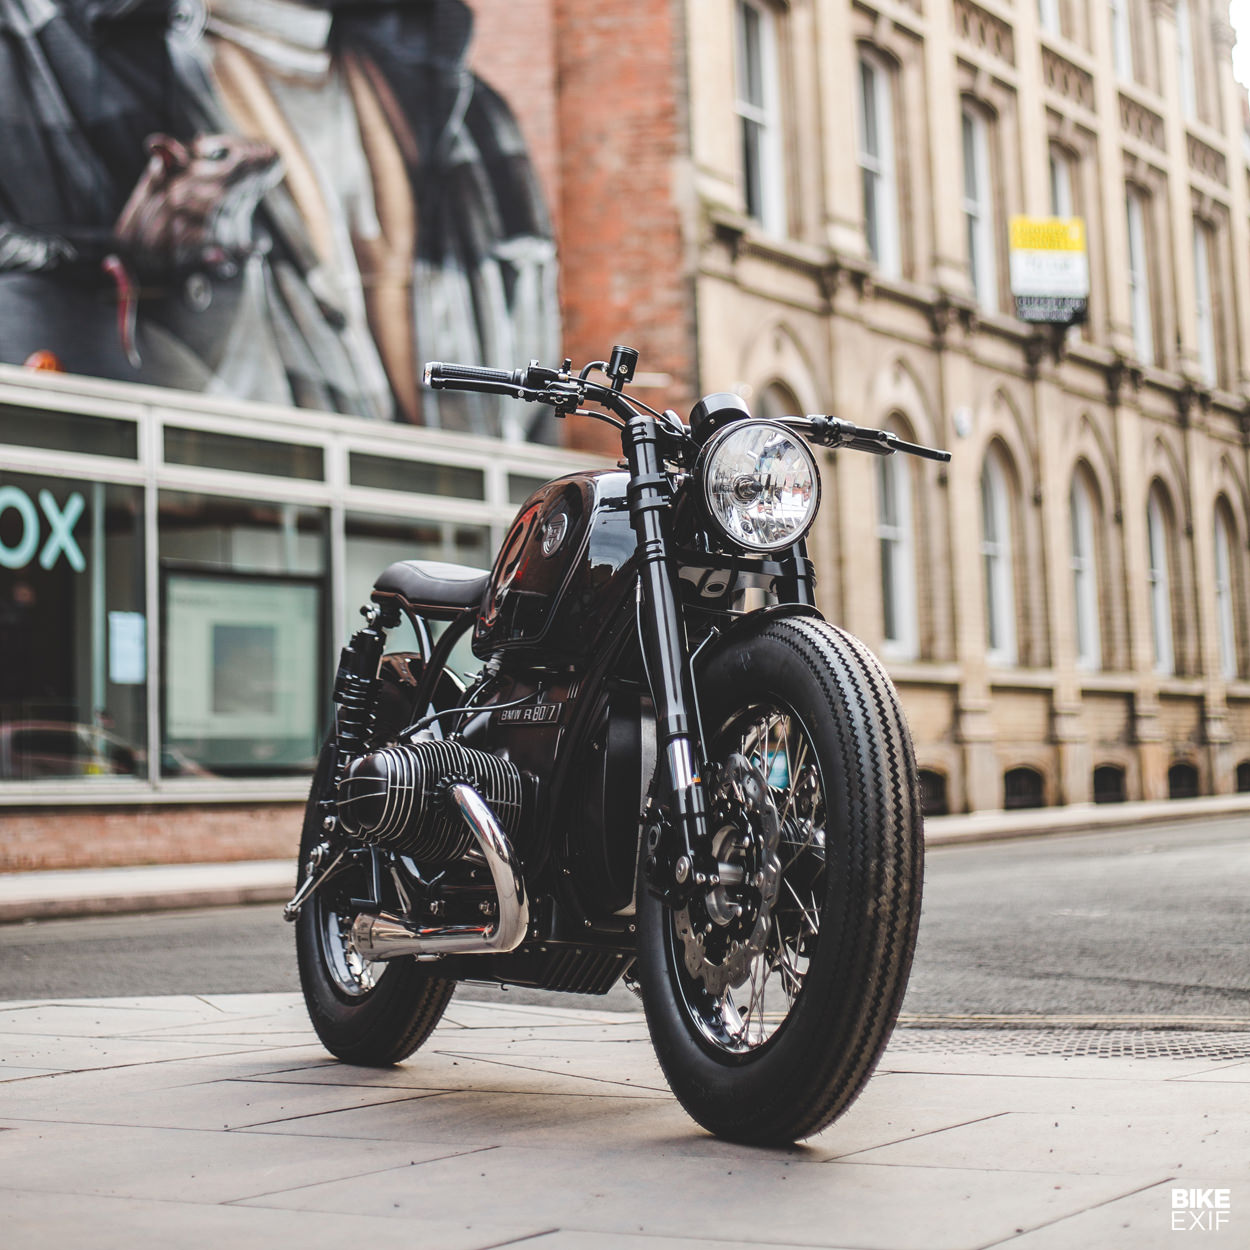 BMW R80 cafe racer by Sinroja Motorcycles